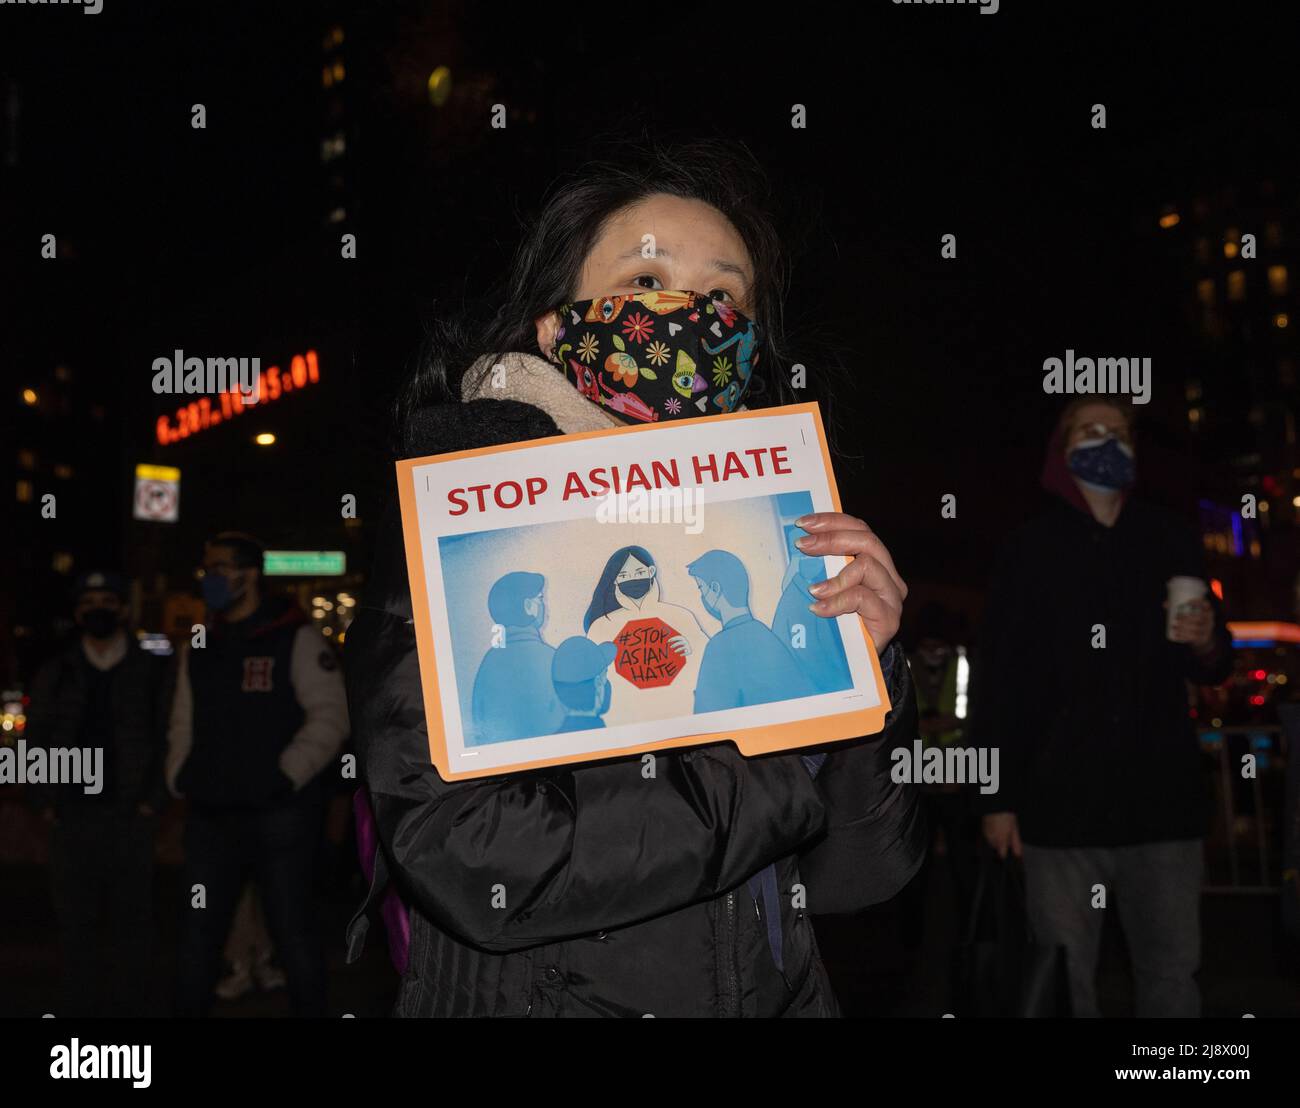 NEW YORK, N.Y. – March 19, 2021: A demonstrator is seen in Union Square Park during a vigil for victims of anti-Asian violence. Stock Photo